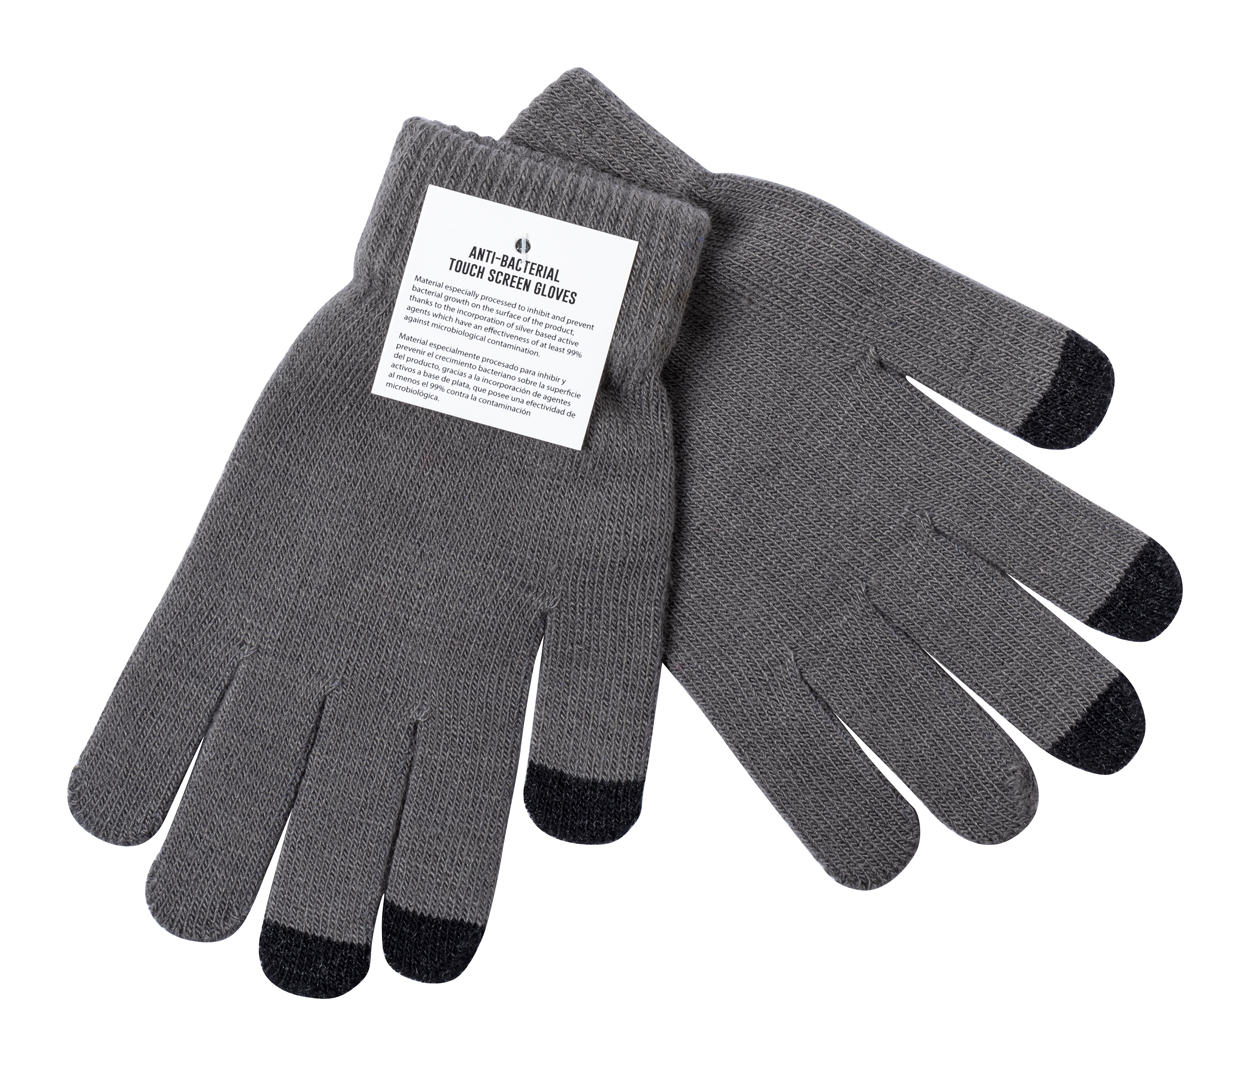 Promo  Tenex anti-bacterial touch screen gloves